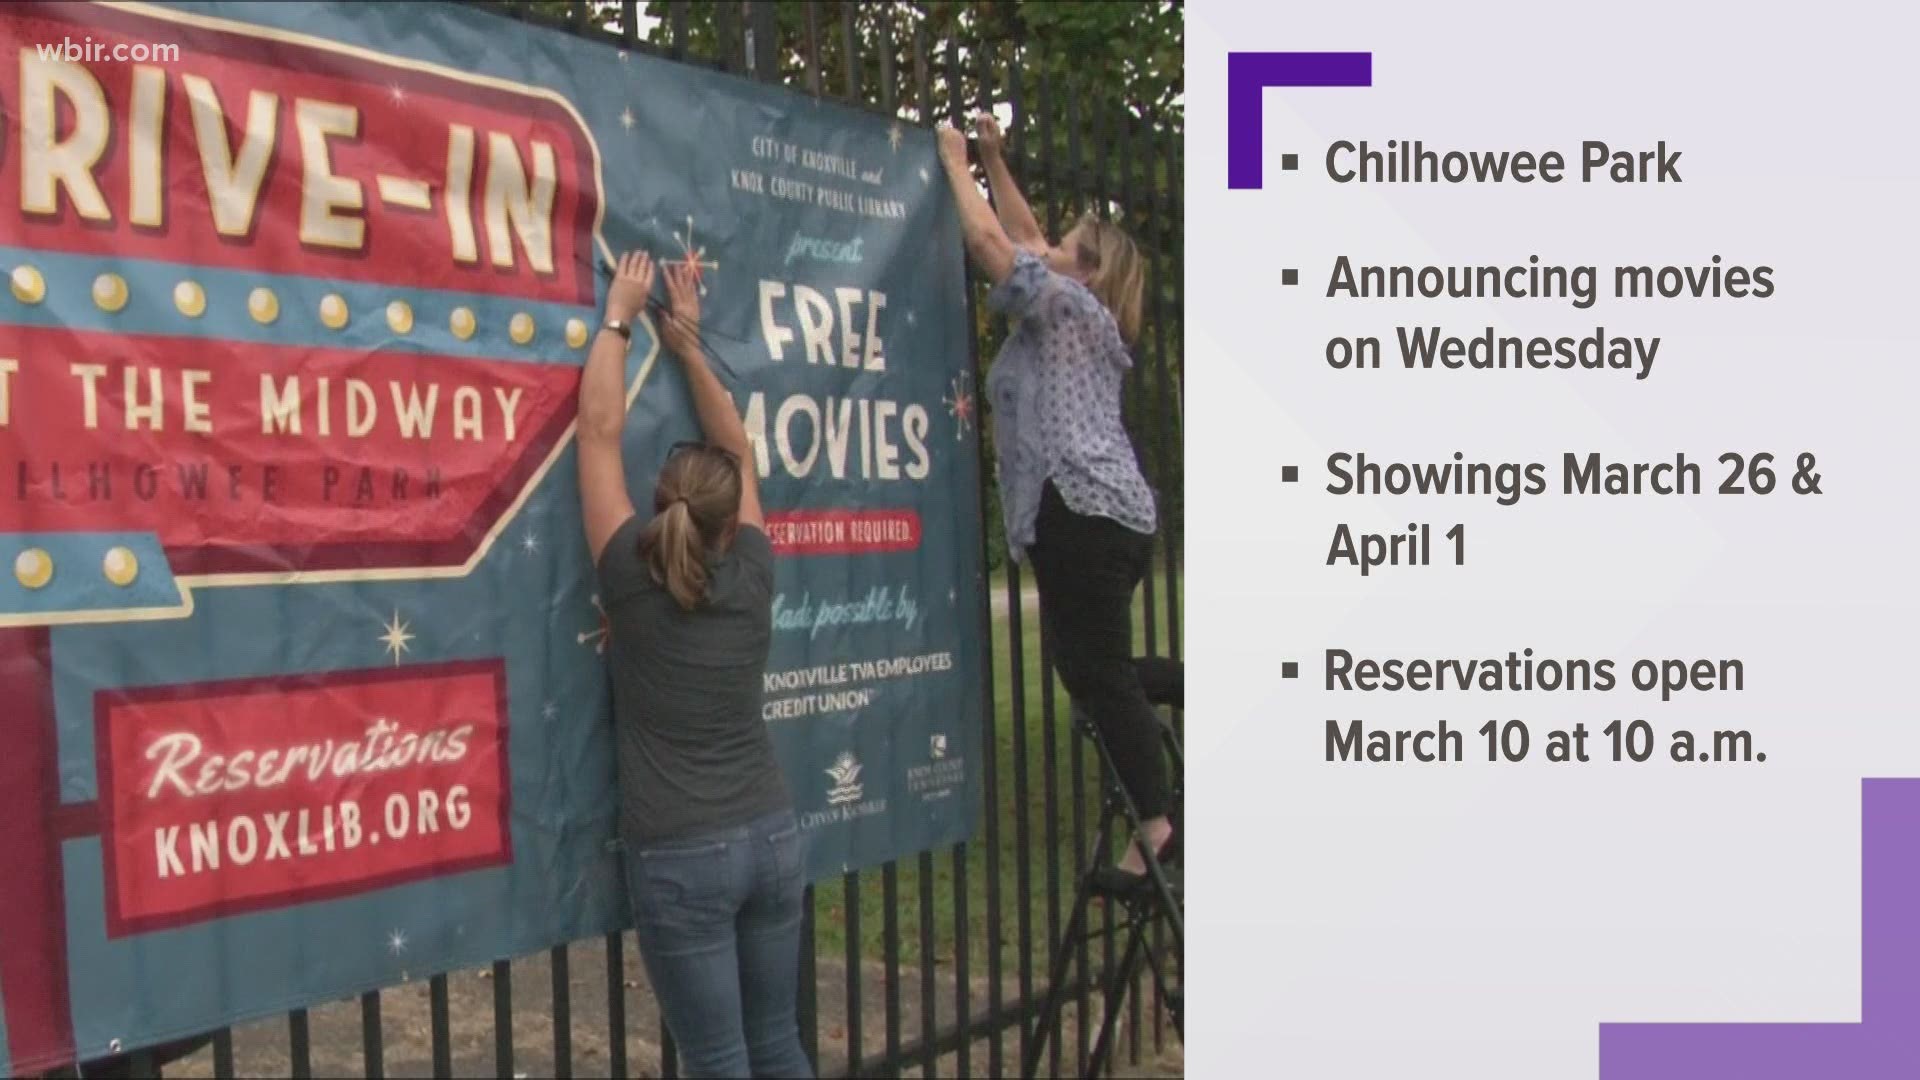 Drive-in movies at Chilhowee Park are coming back. The city is partnering with the Knox County Public Library to put on a spring series.